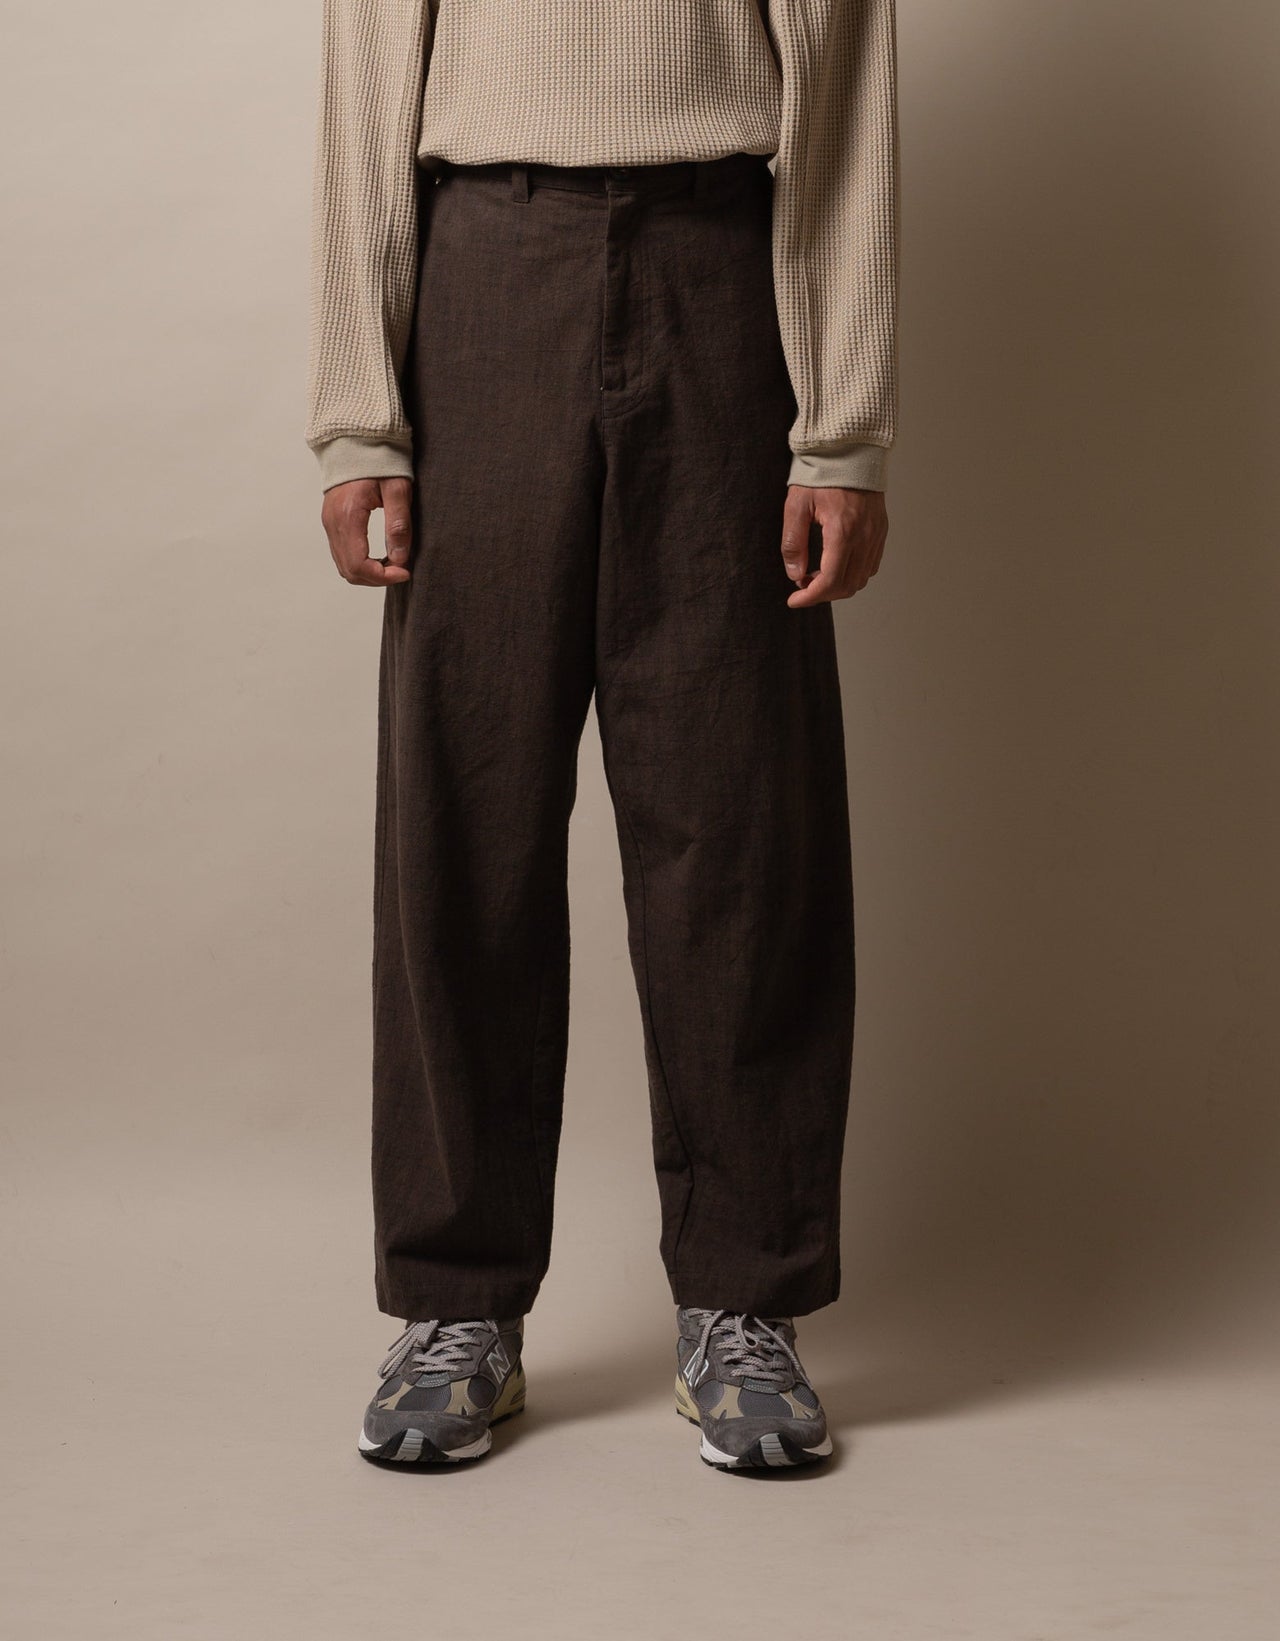 Satta | Slow Pant - Speckled Brown